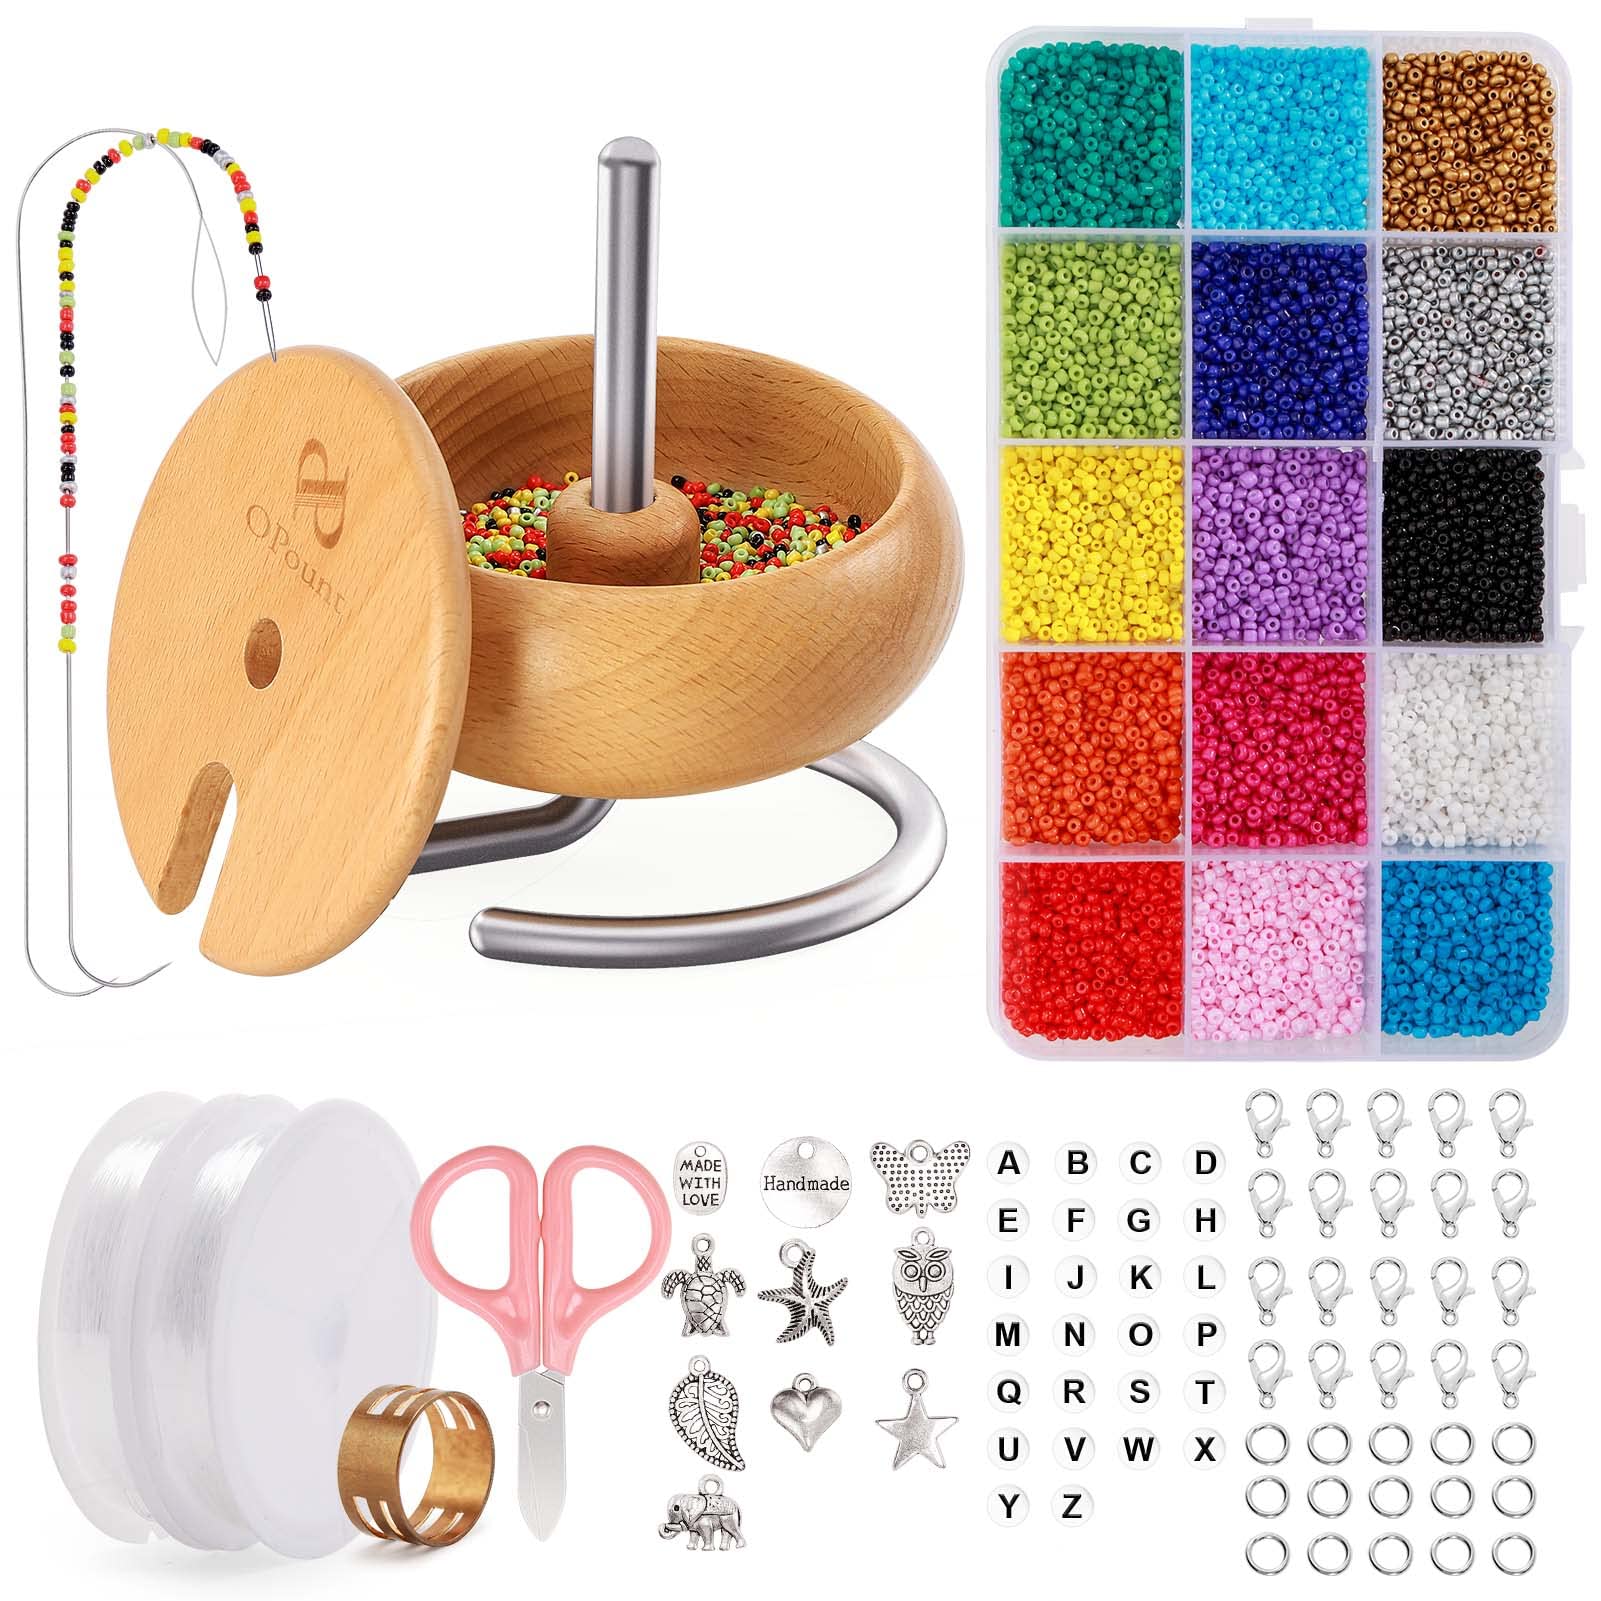 PP OPOUNT Bead Spinner Bowl with 2 PCS Large Eye Beading Needles